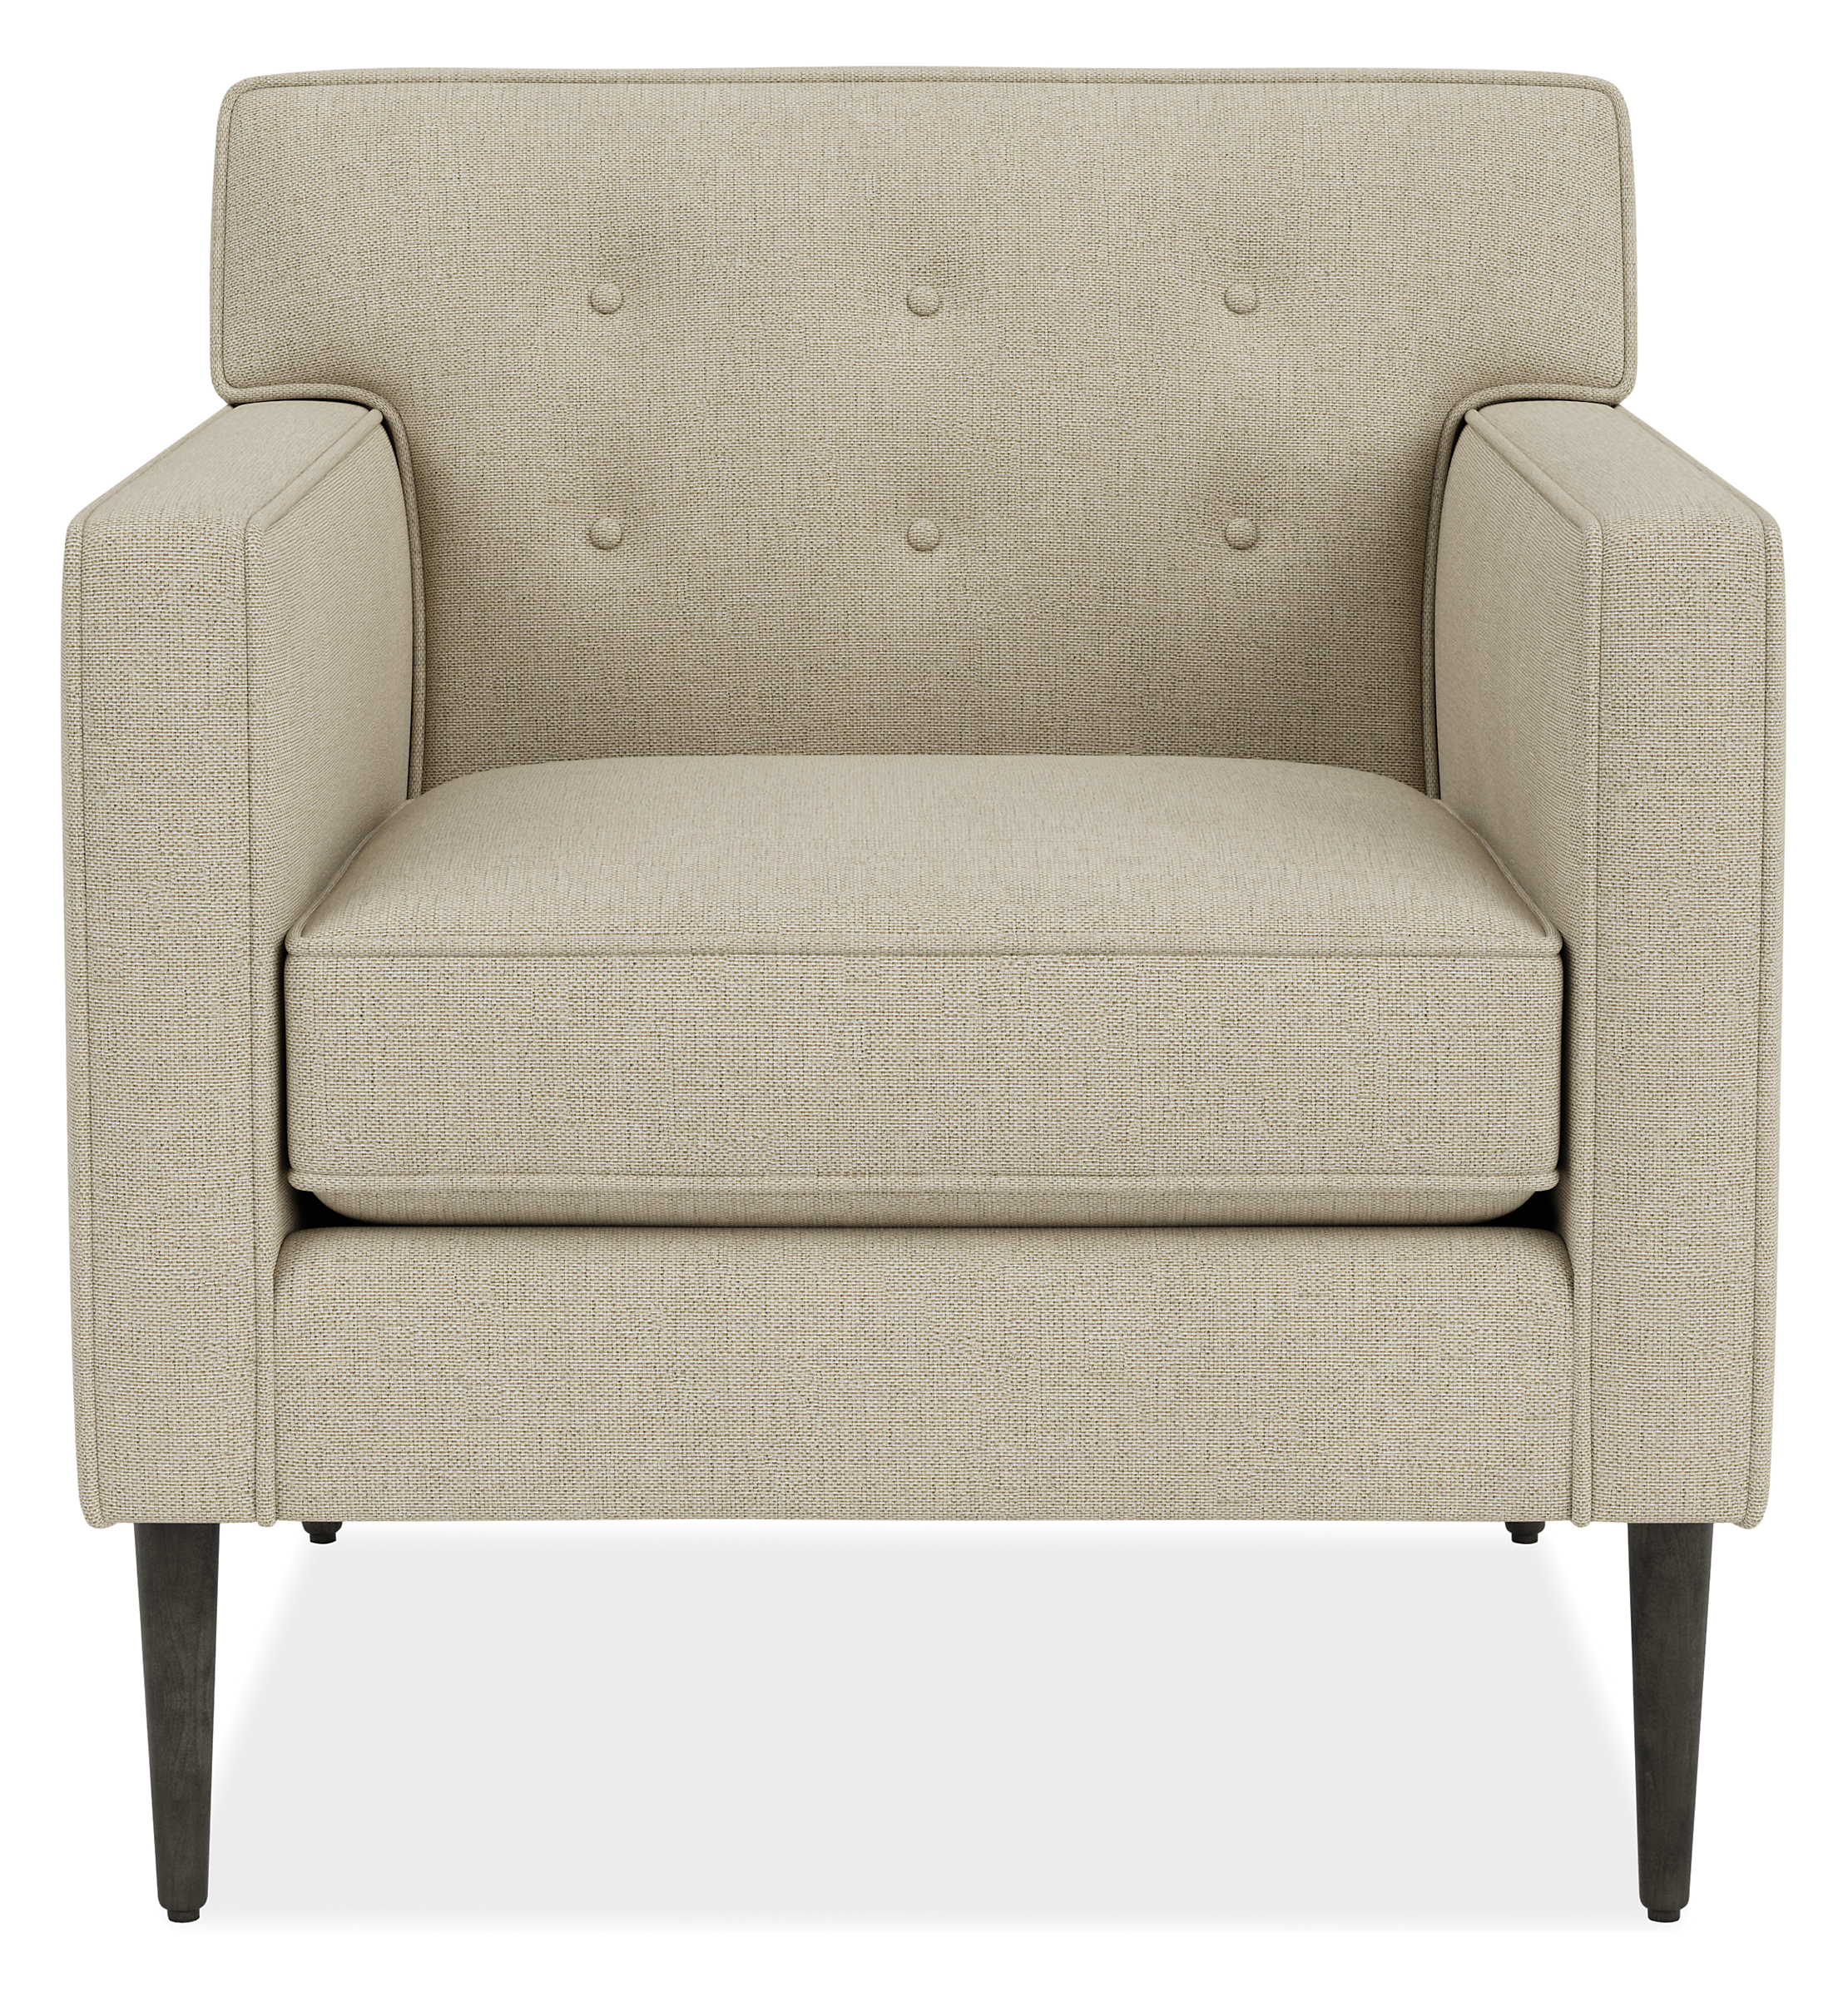 Front view of Holmes 30 Chair in Sumner Linen.